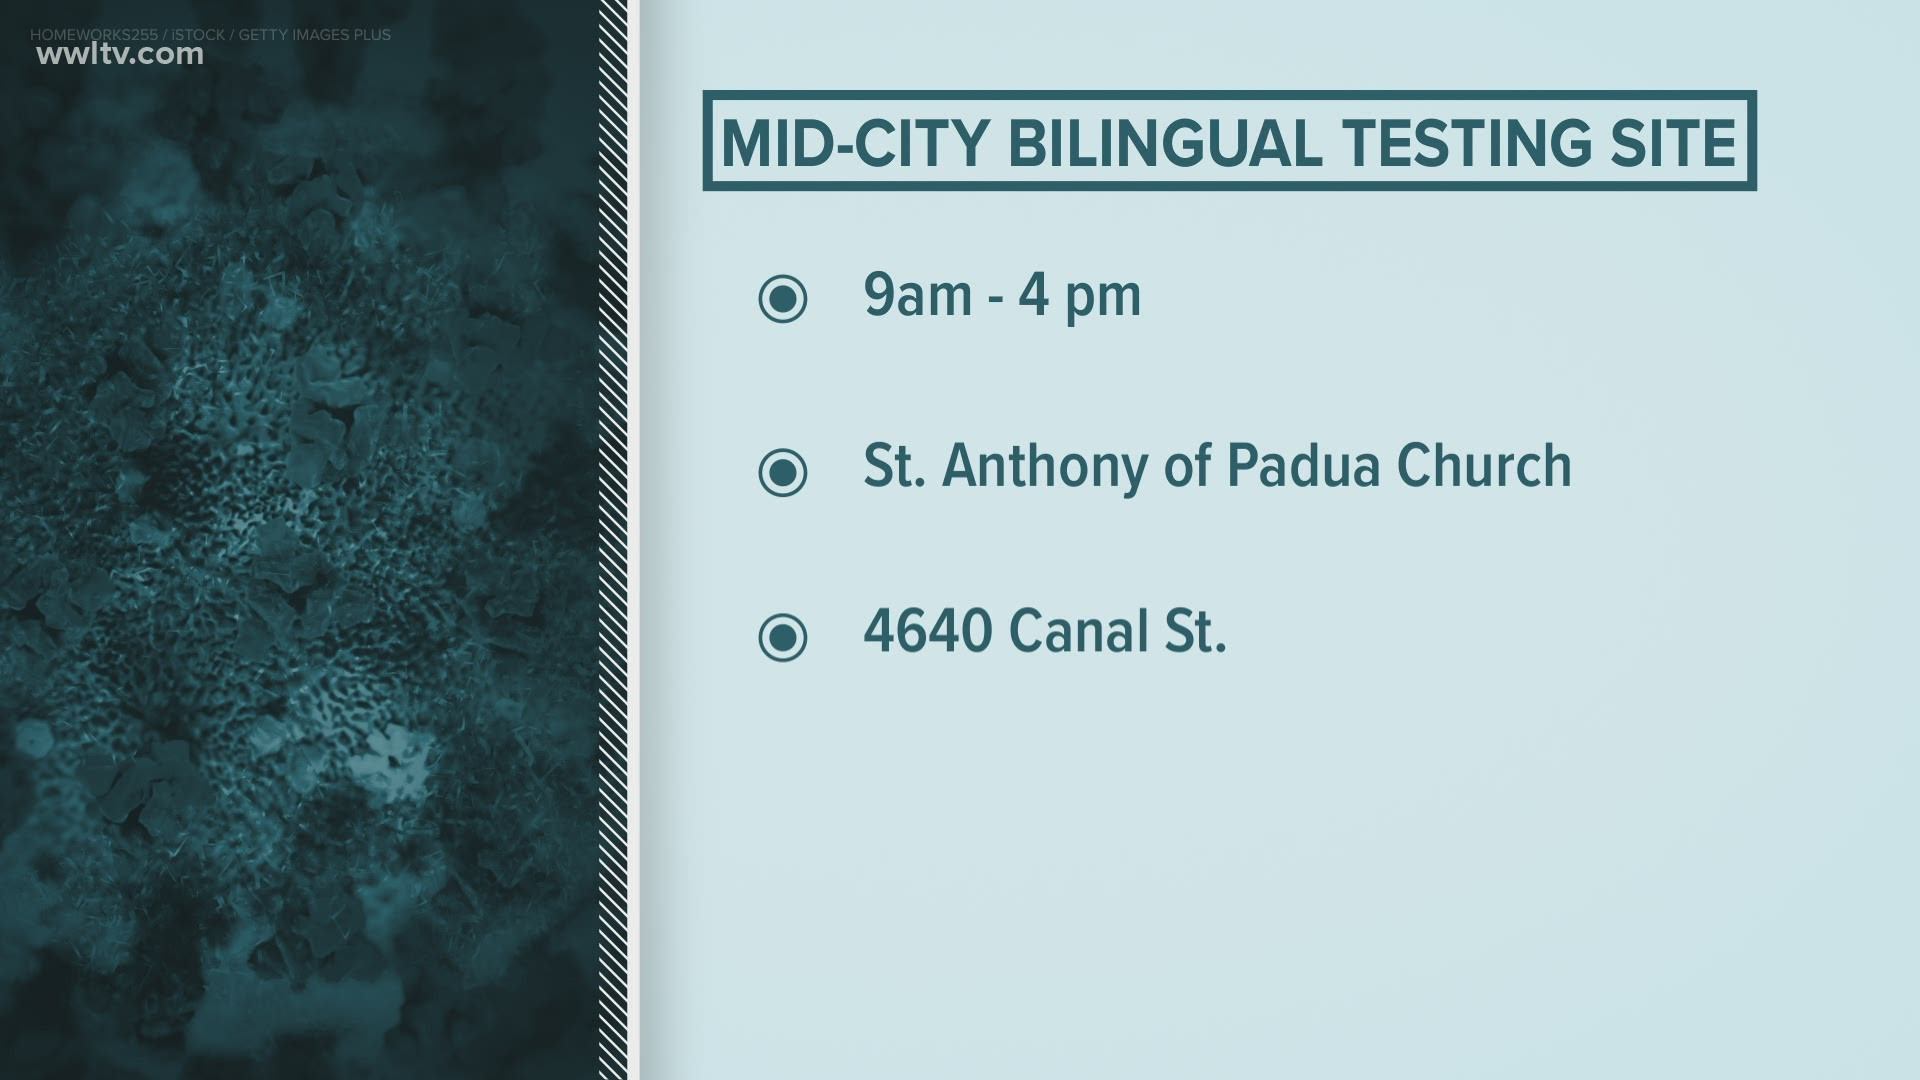 Martin Gutierrez, CEO of Catholic Charities New Orleans, says bilingual testing sites will help curb the alarming rate of COVID infection in the Hispanic community.